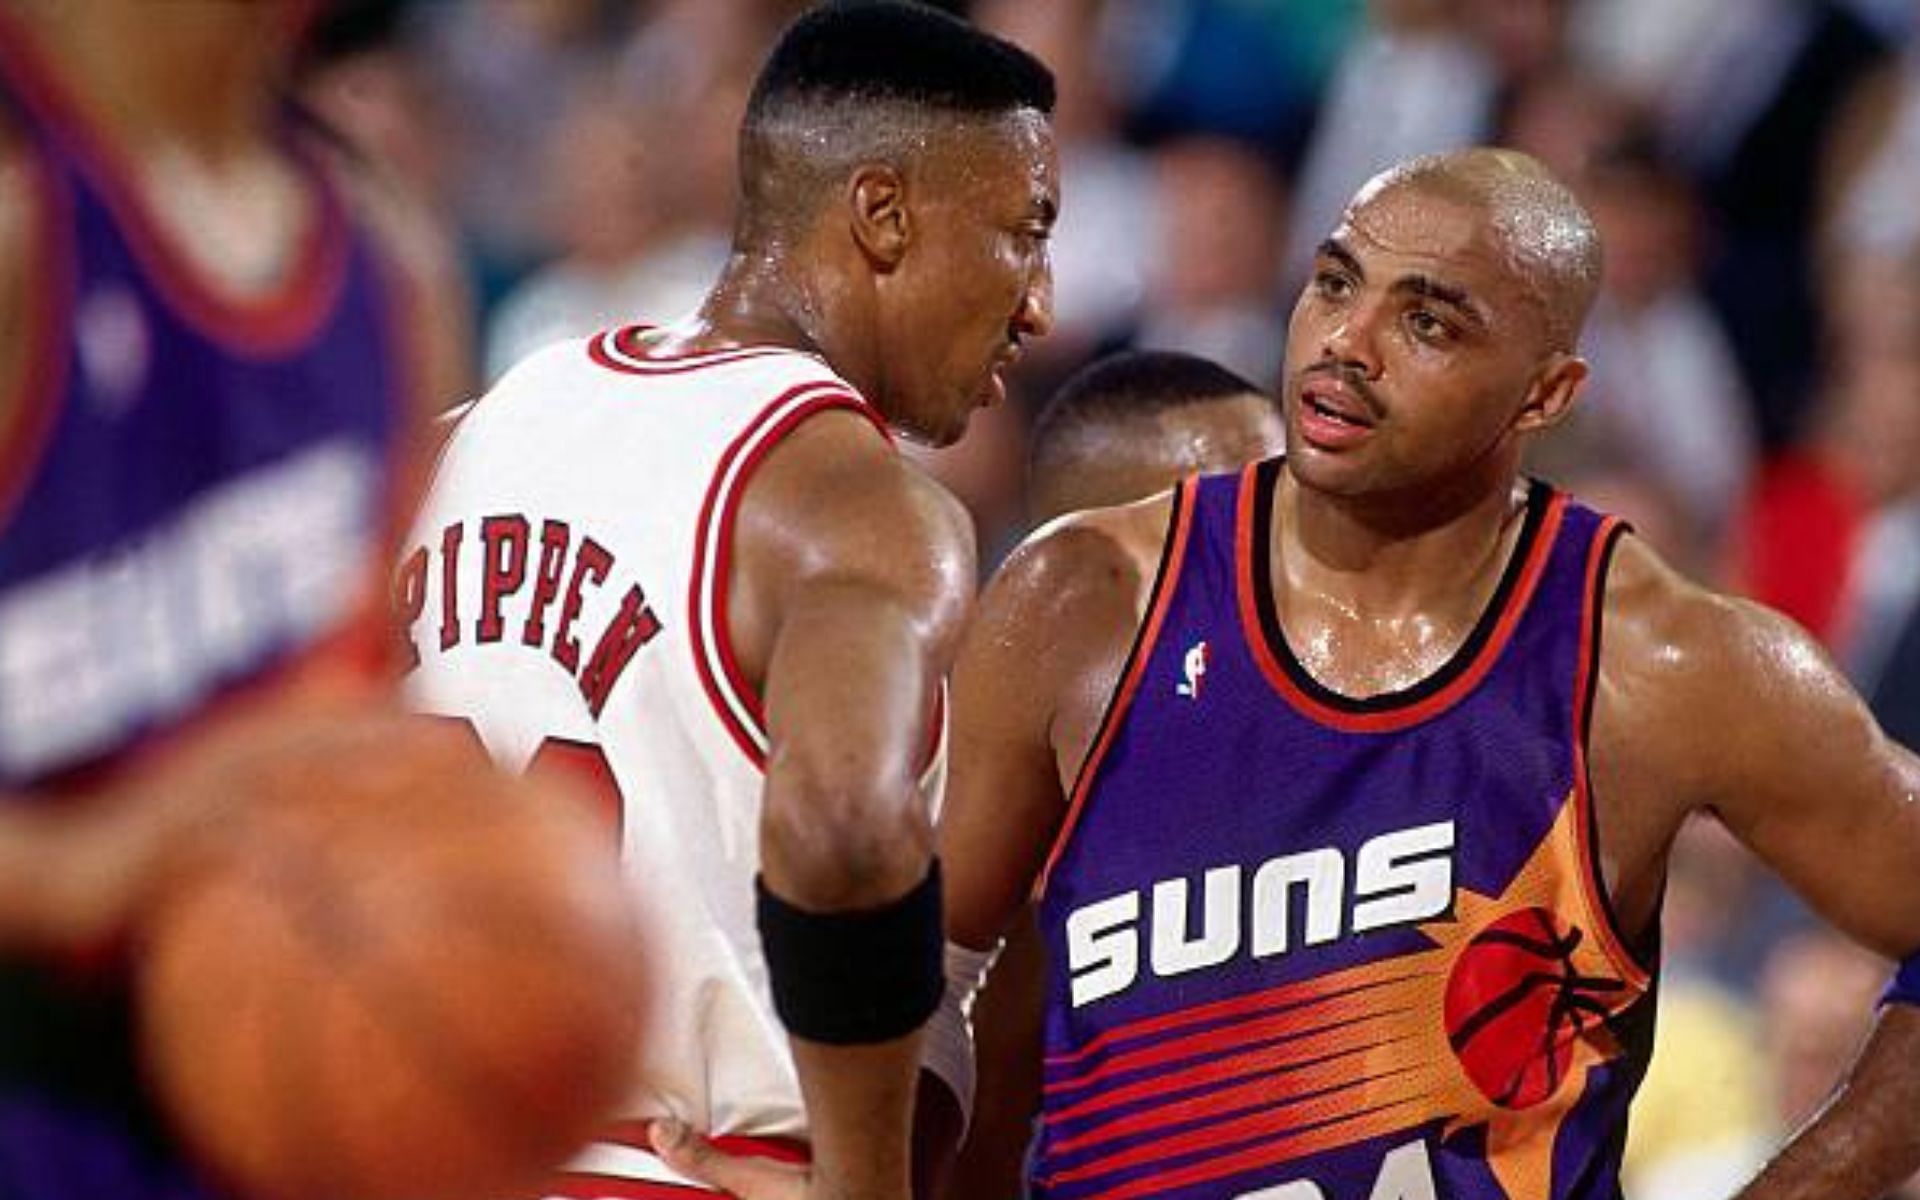 Scottie Pippen and Charles Barkley [image courtesy of Andrew D. Bernstein/NBAE via Getty Images]